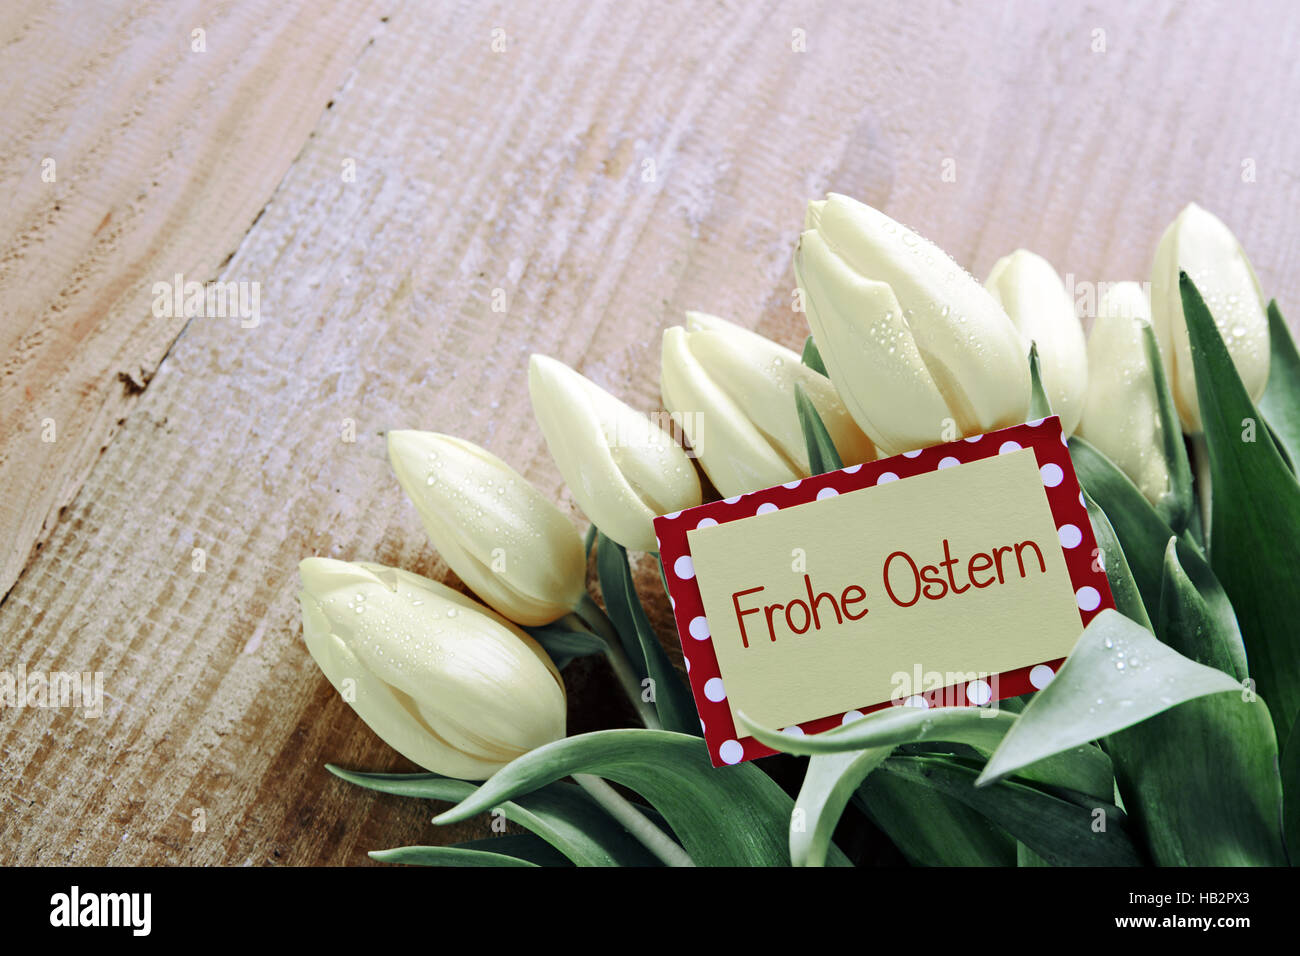 Frohe Ostern card. Stock Photo